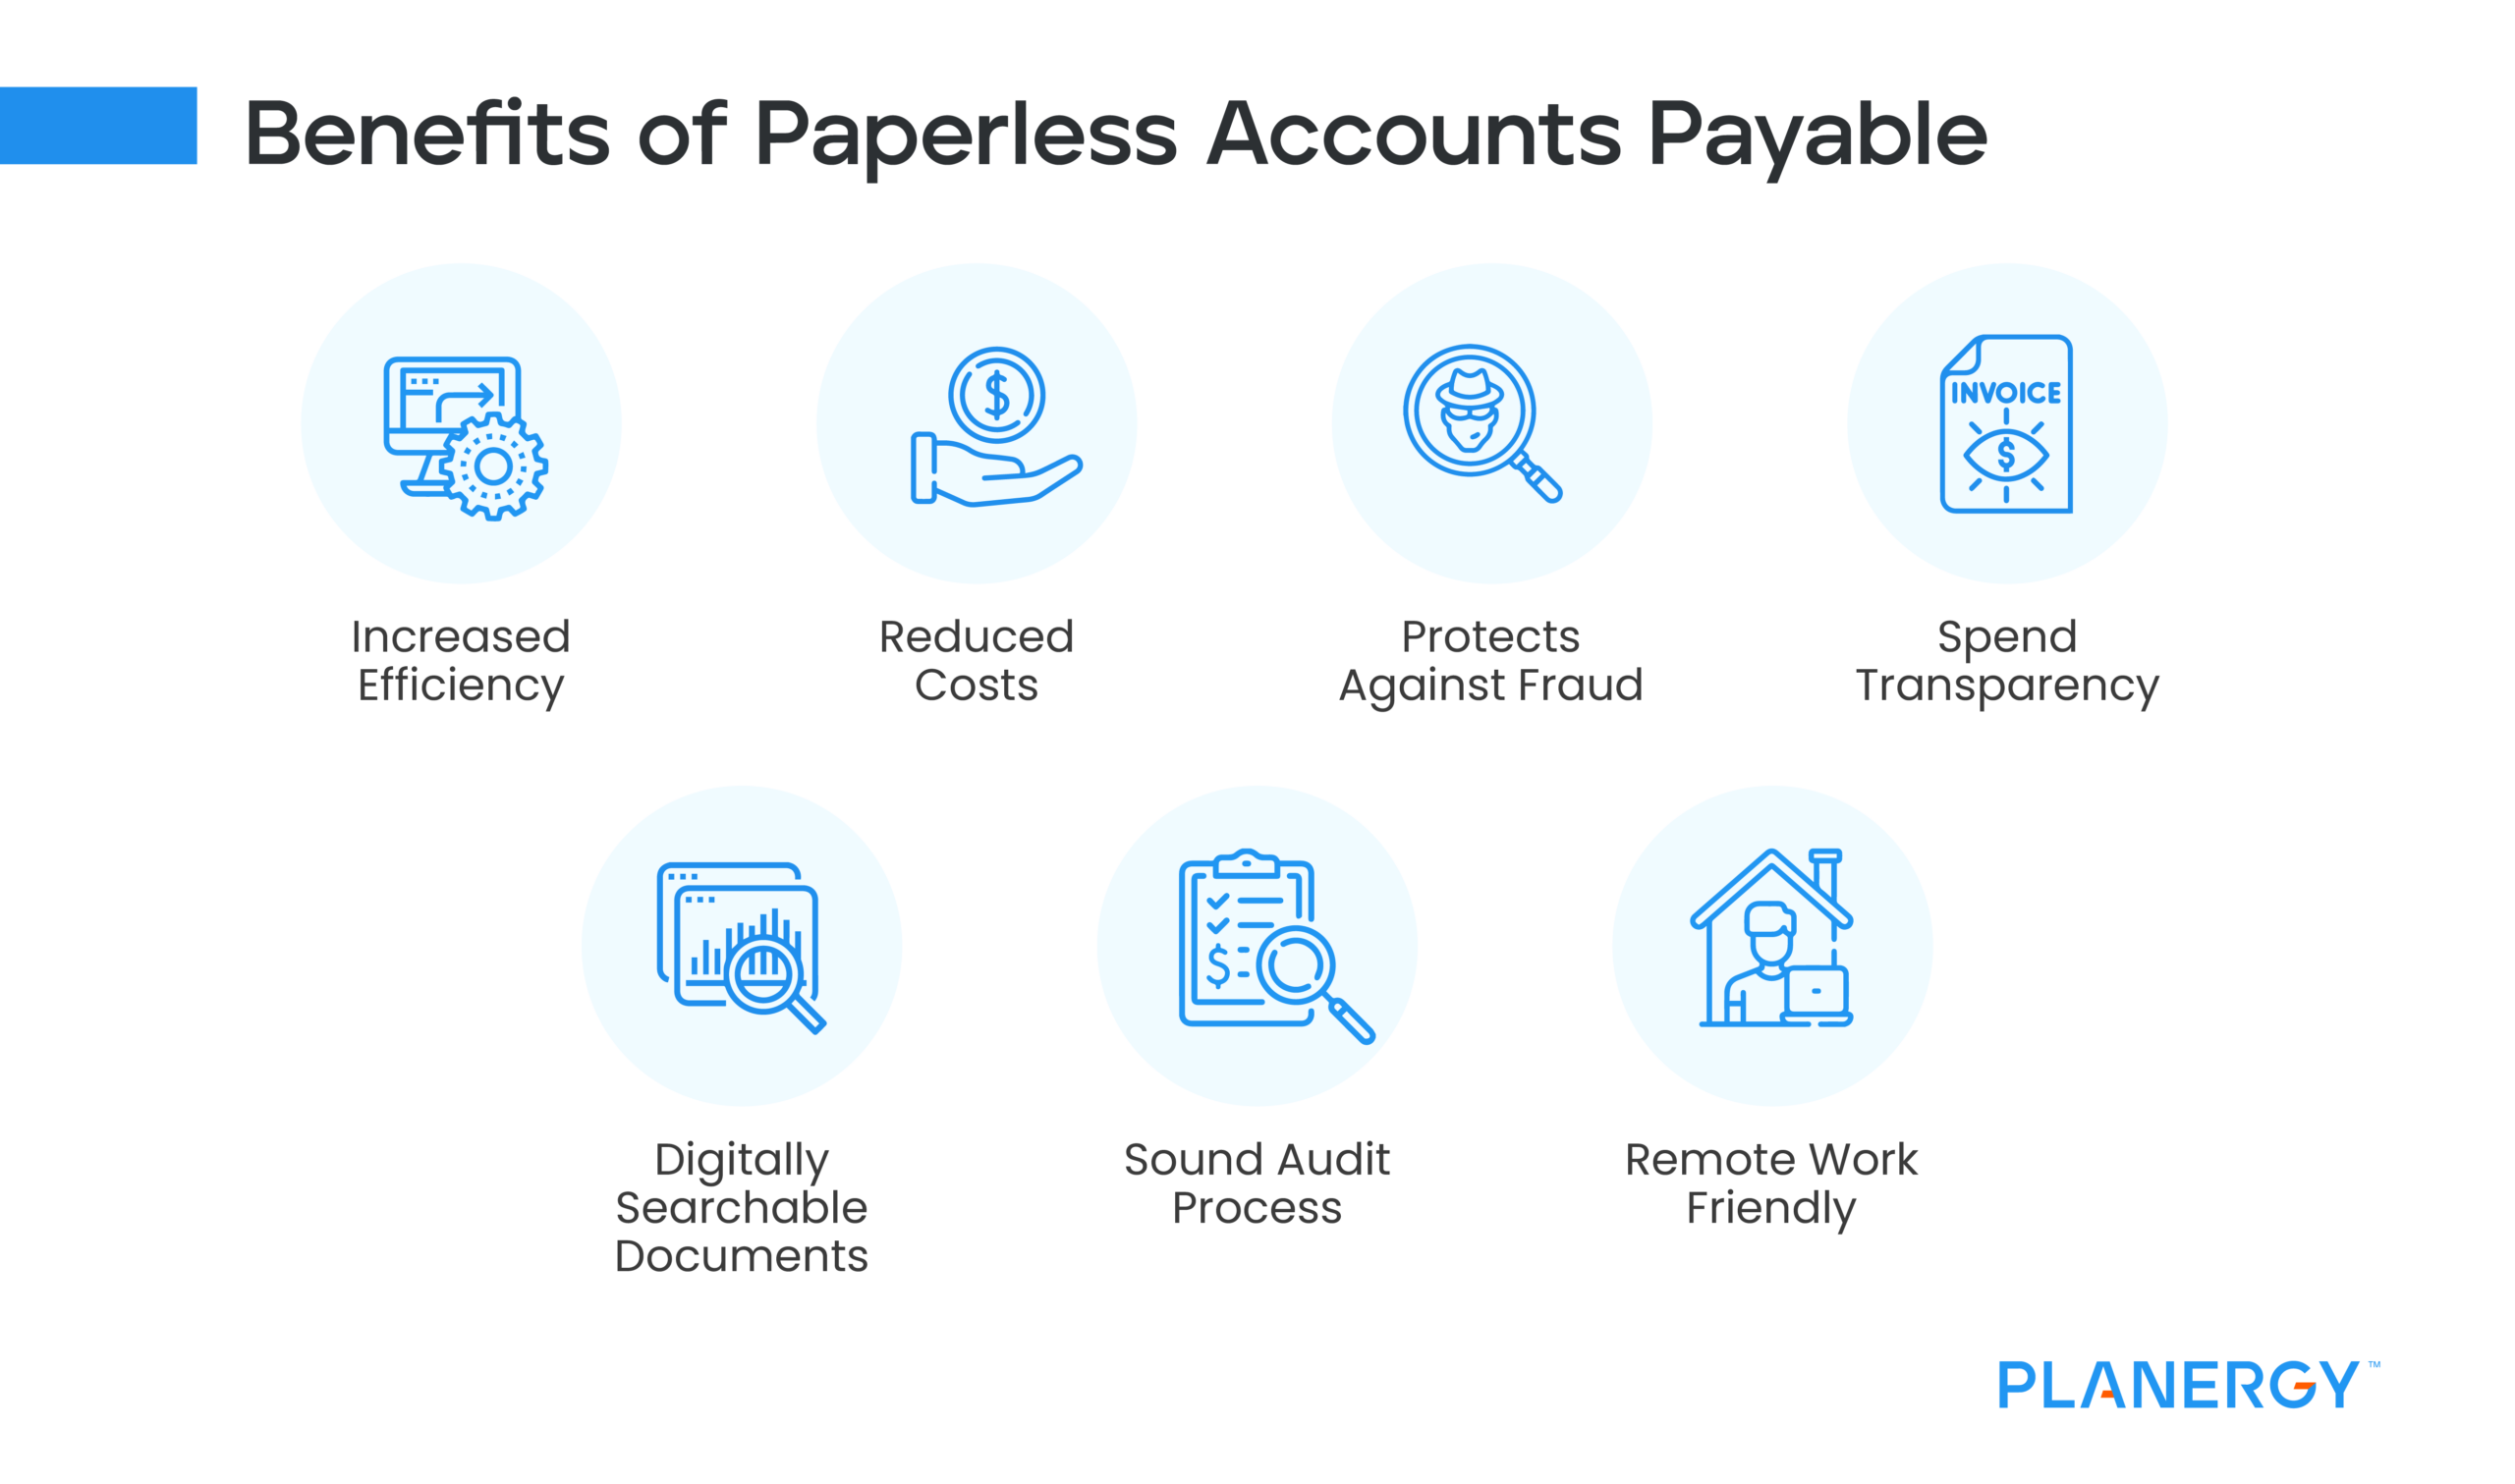 Benefits of Paperless Accounts Payable